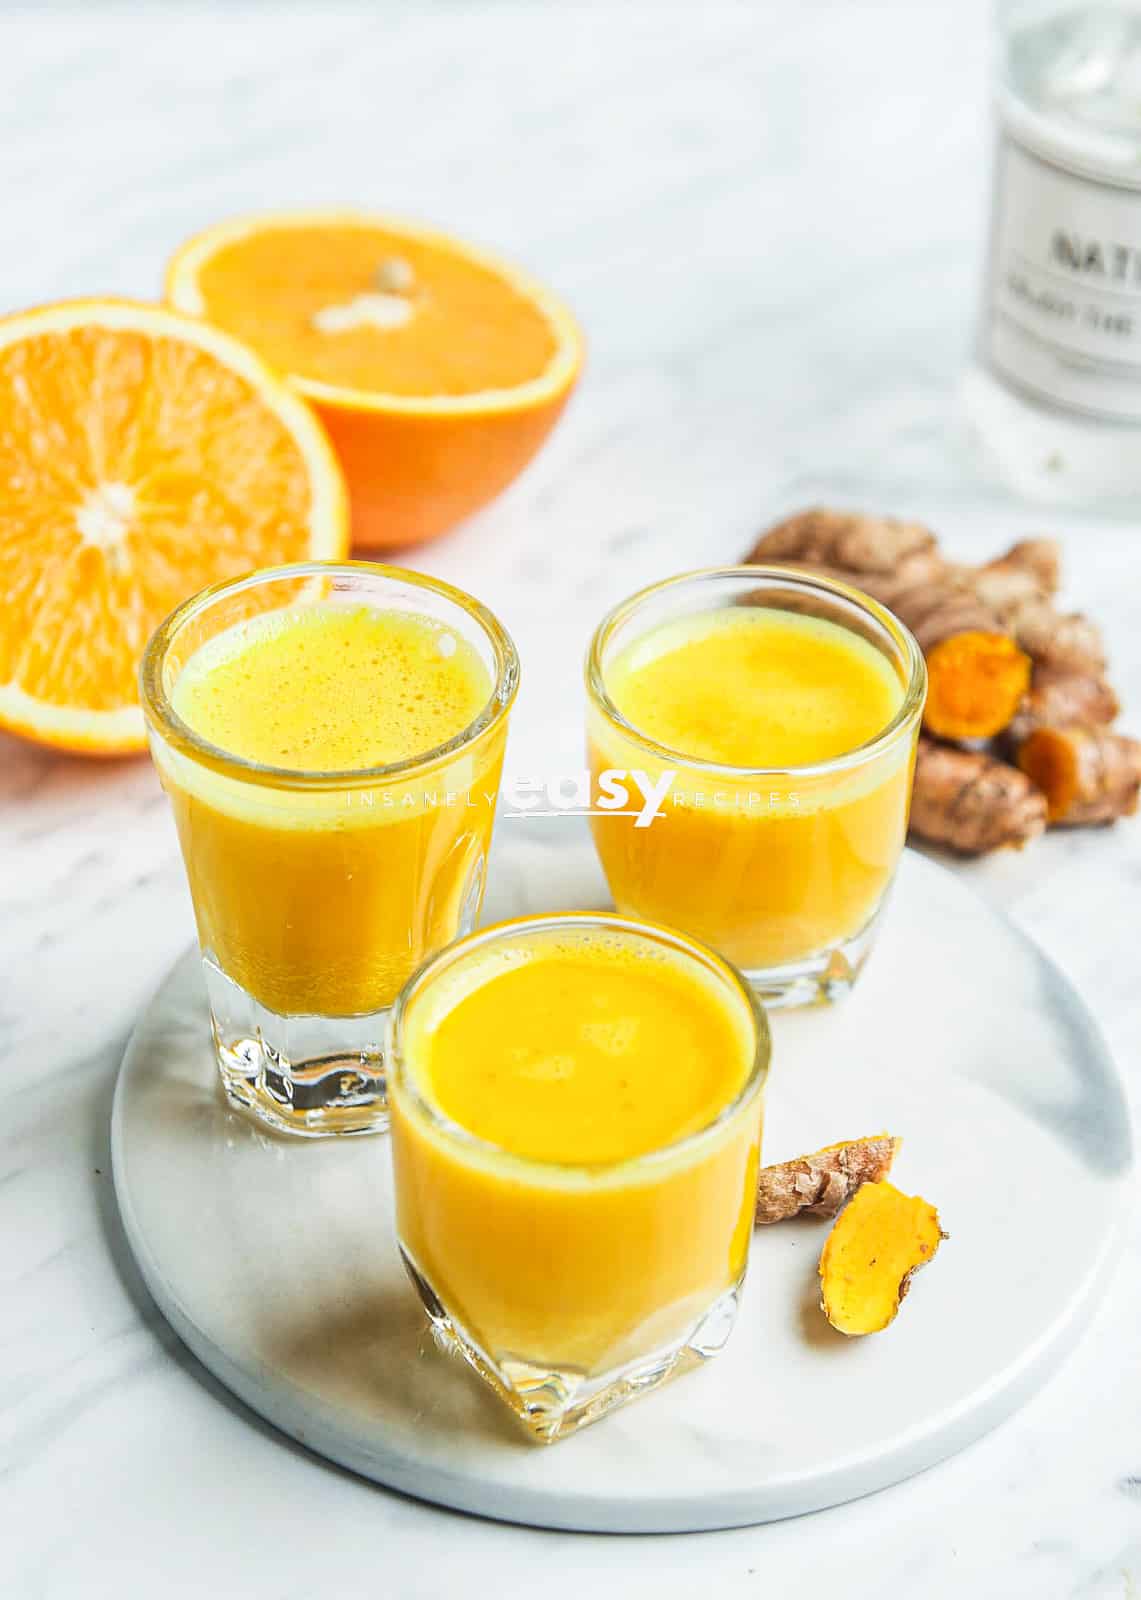 photo of 3 shot glasses filled with turmeric shots, on a white plate, with slices of fresh oranges and fresh turmeric in the background.